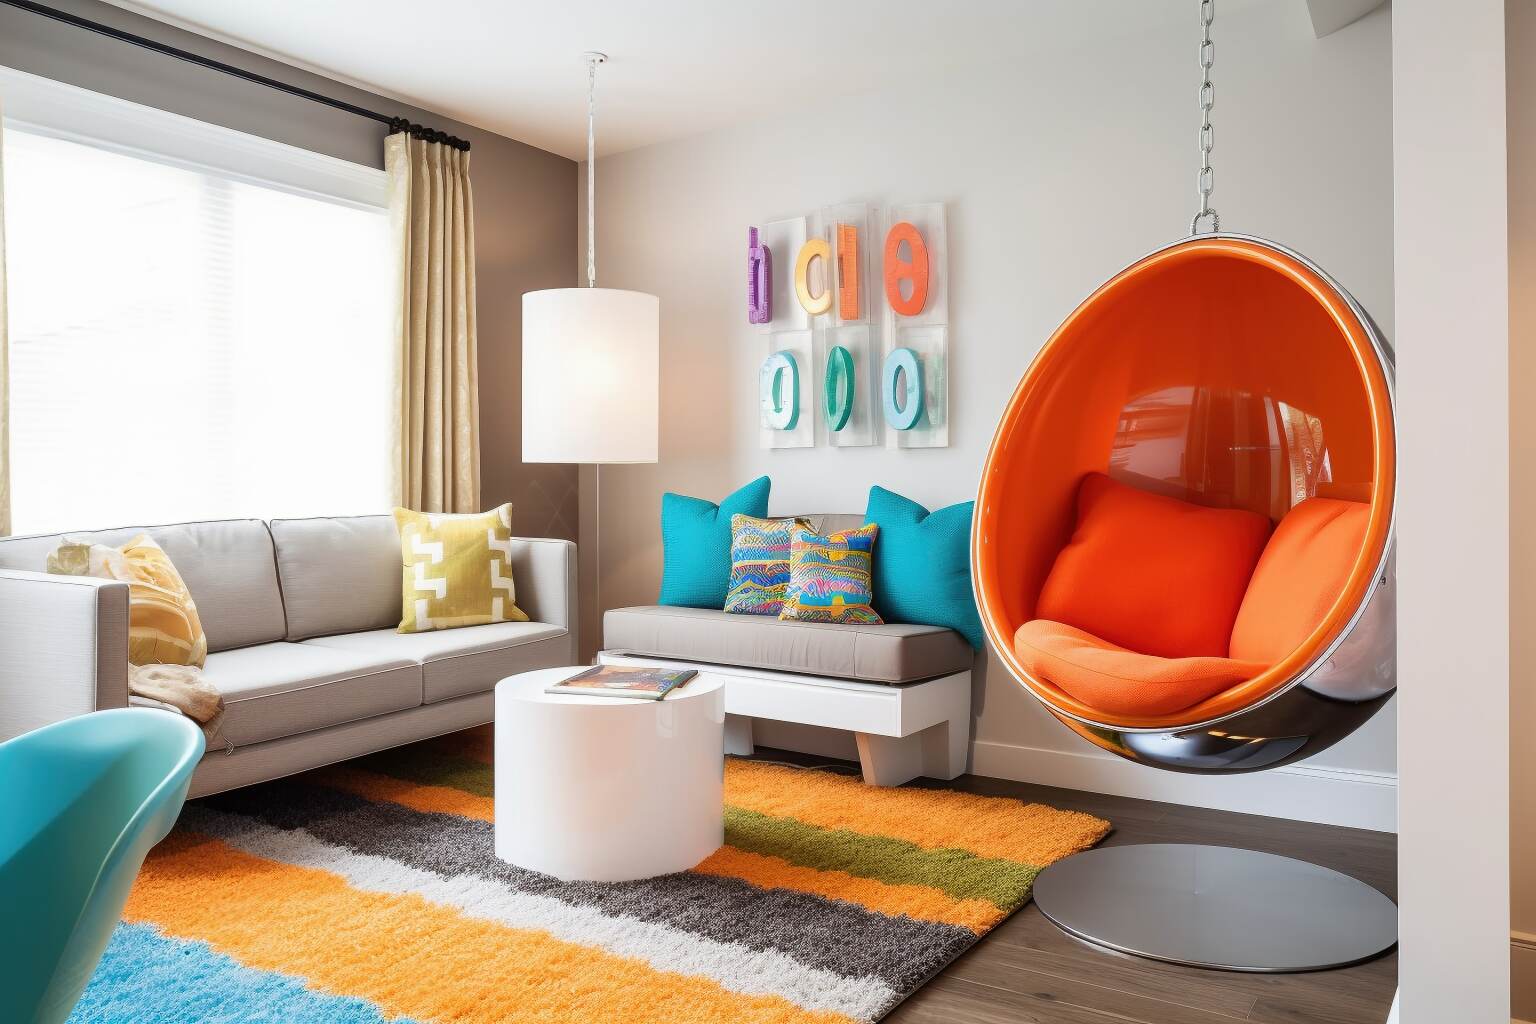 A Hanging Egg Chair Is Situated In A Cozy Contemporary Living Room